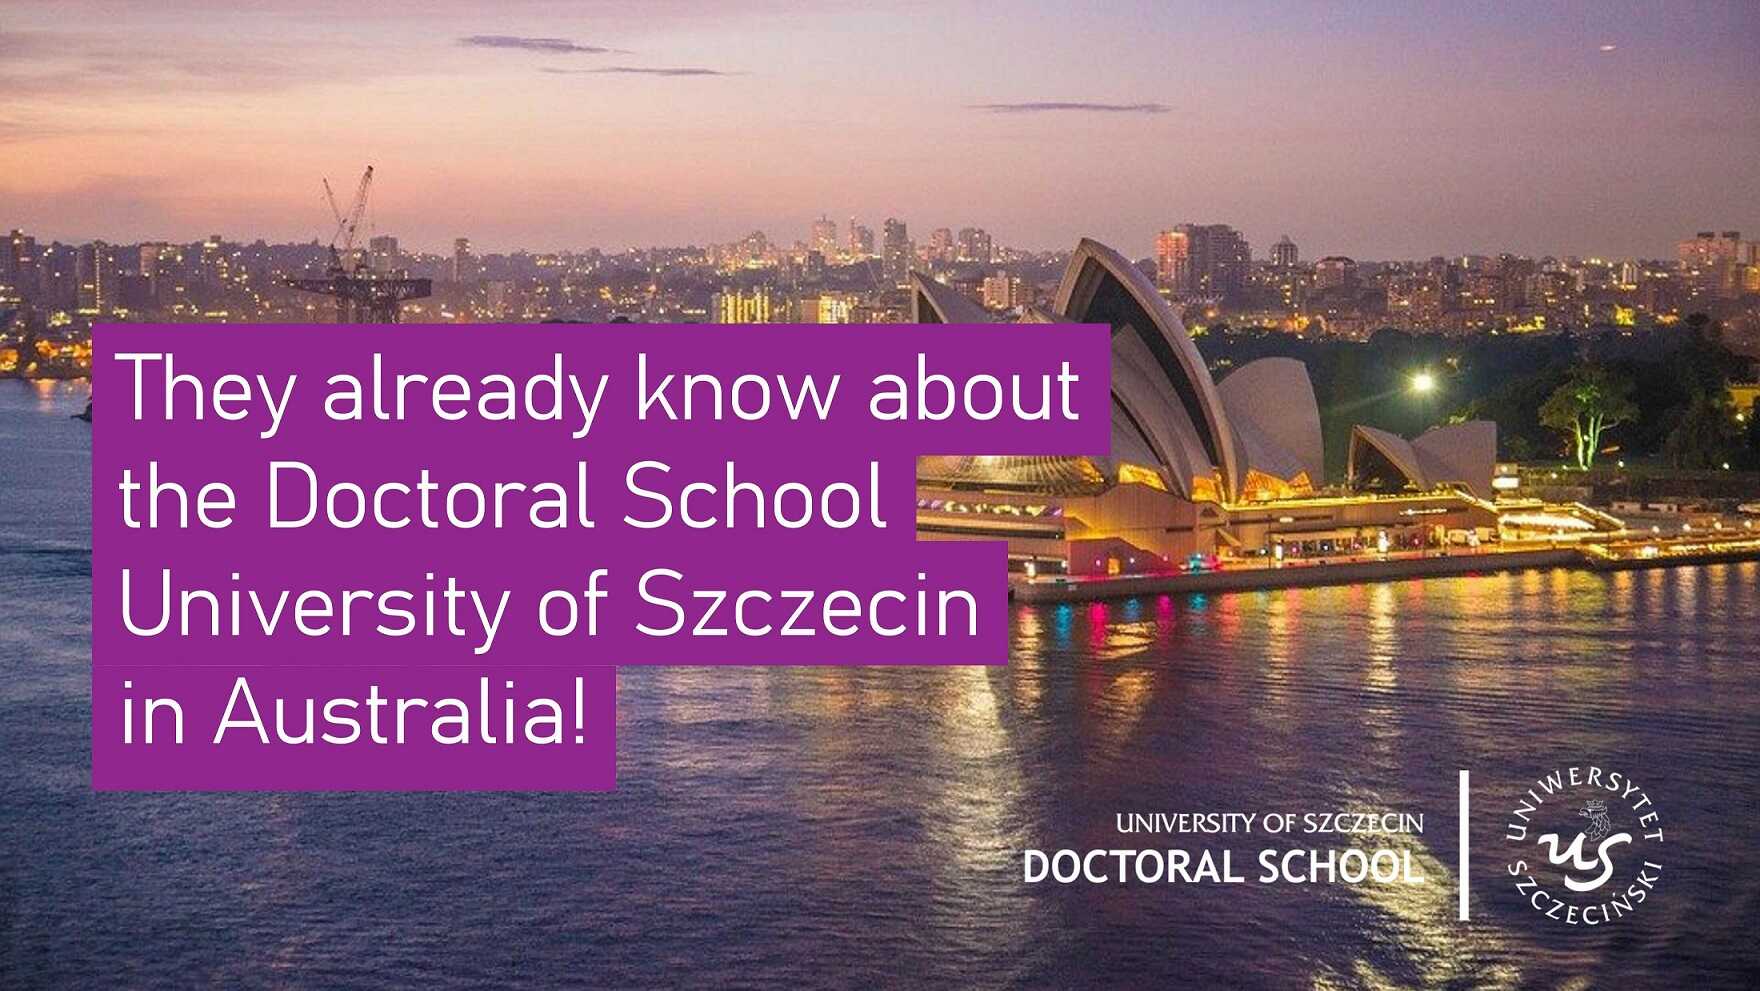 They already know about the Doctoral School University of Szczecin in Australia!